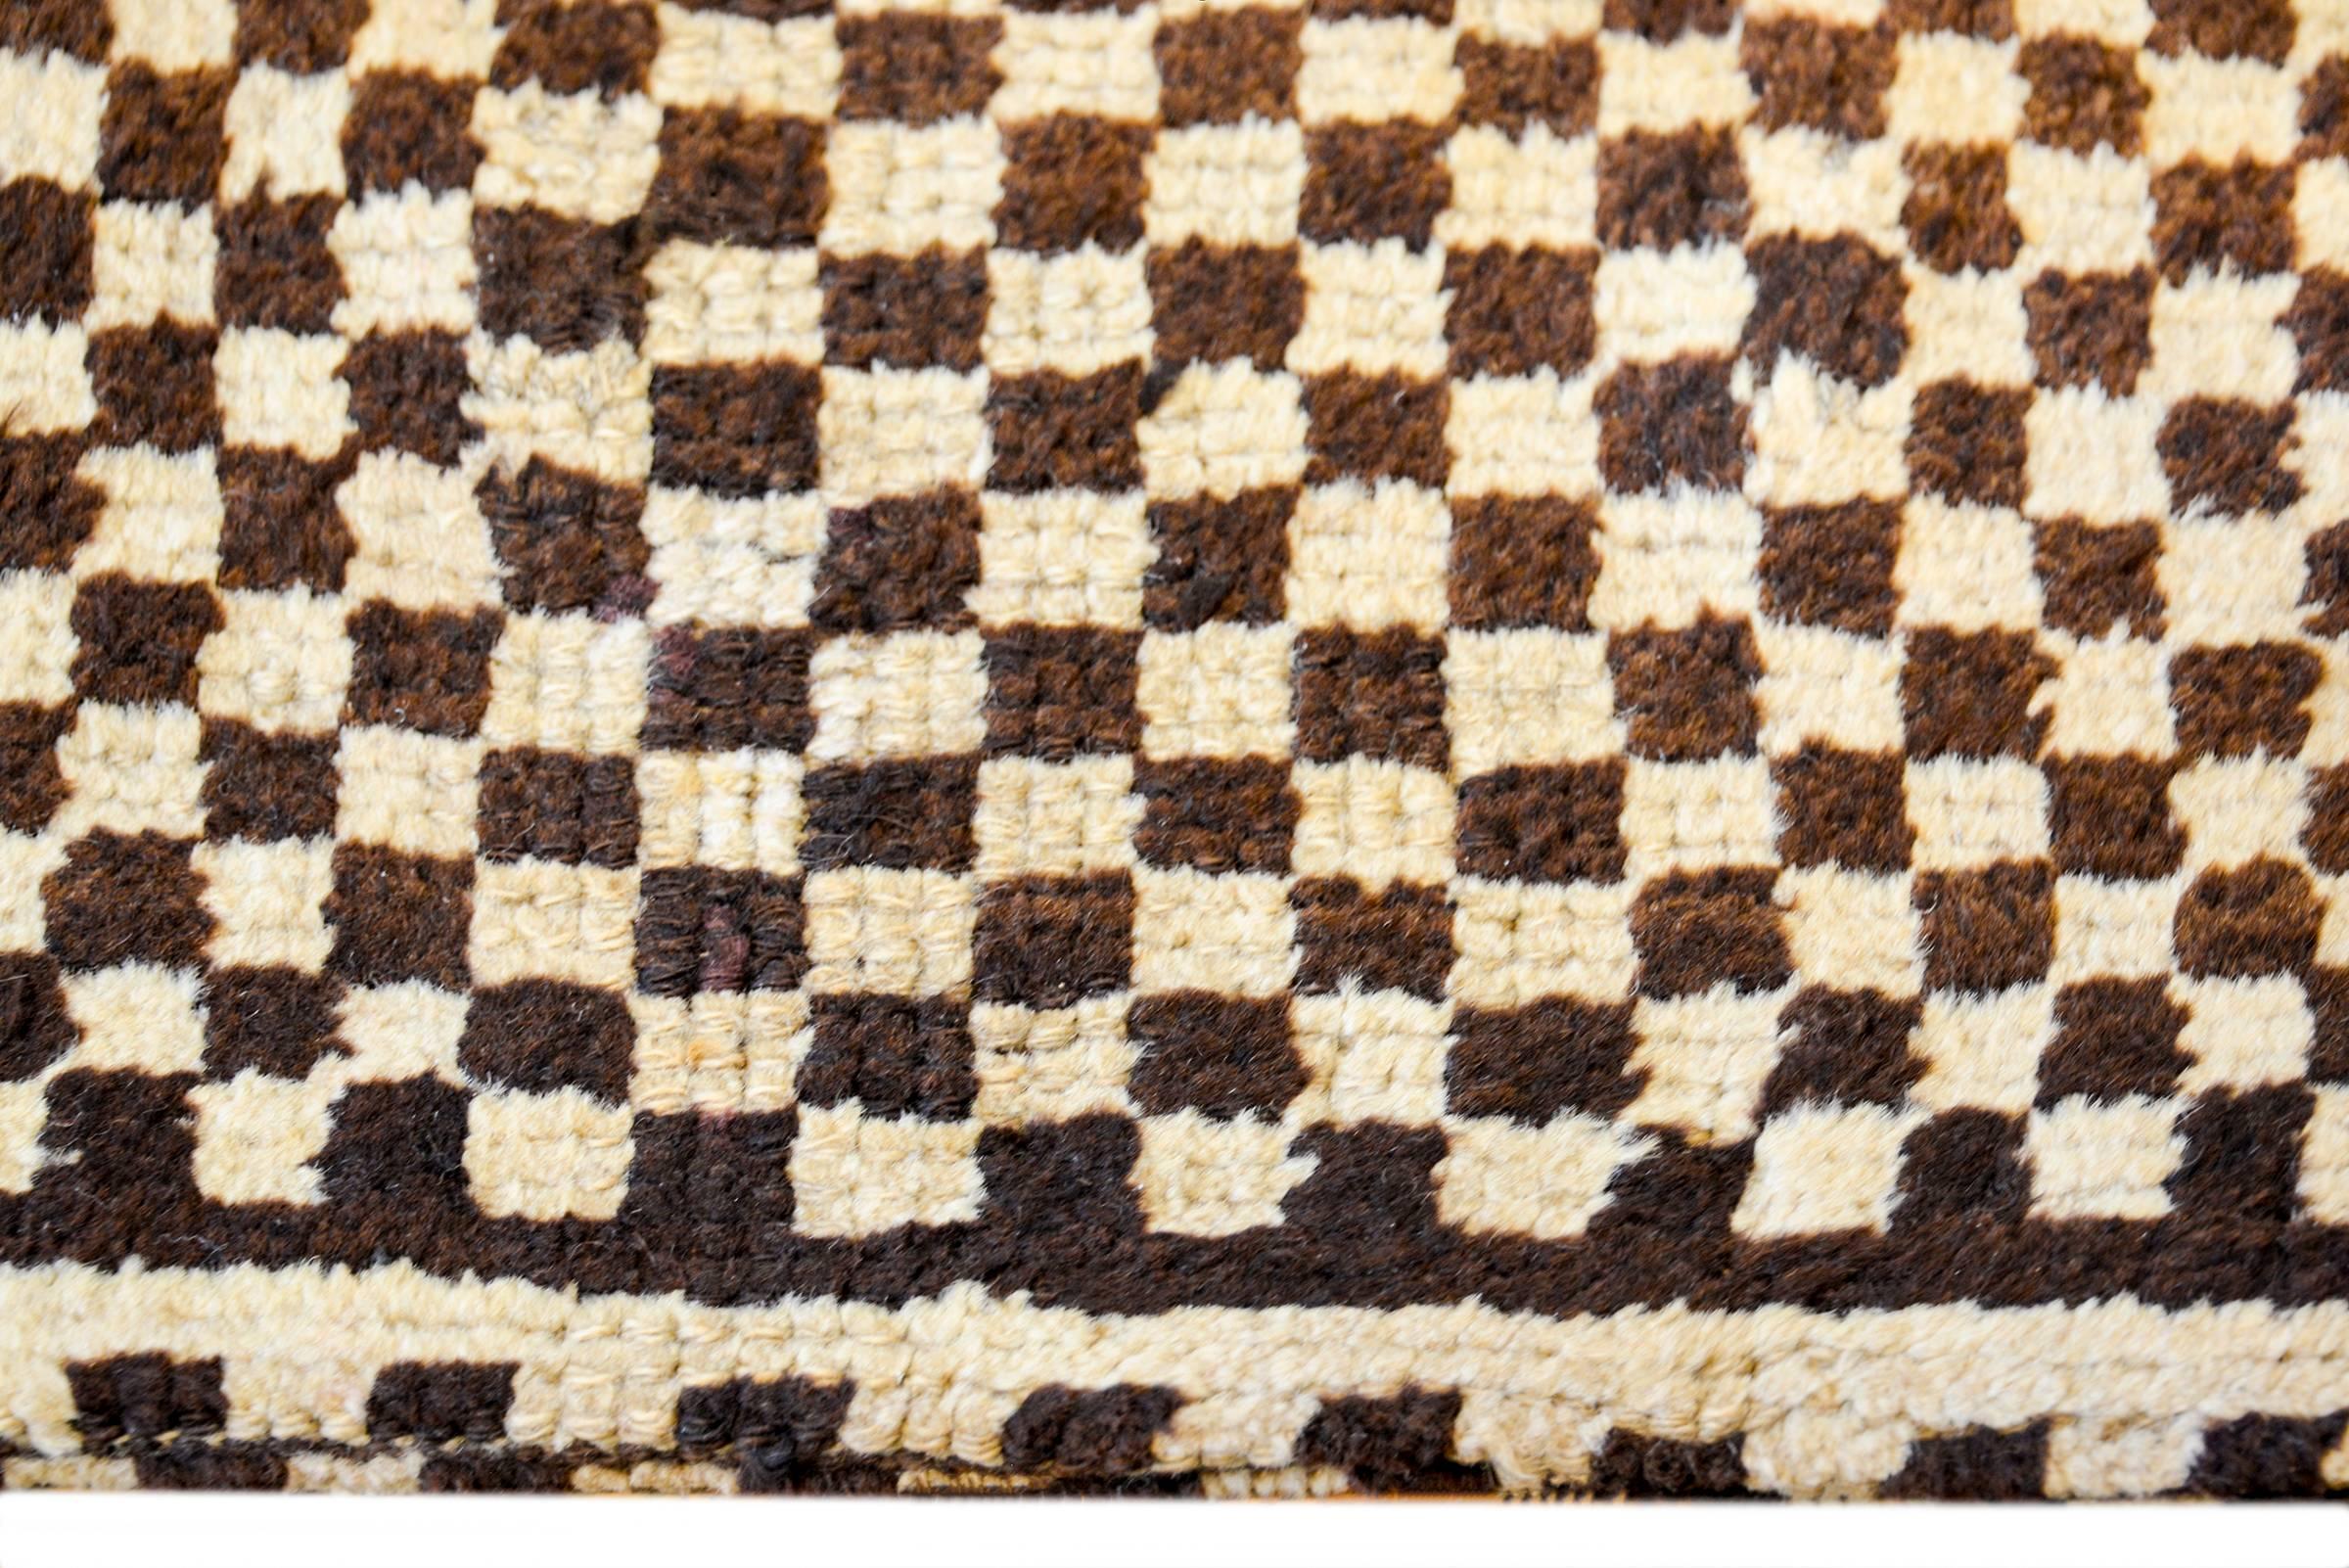 A fantastic and boldly woven early 20th century Persian Gabbeh grain bag with a beautiful woven checkerboard pattern on a stripped ground, woven in natural undyed wool.